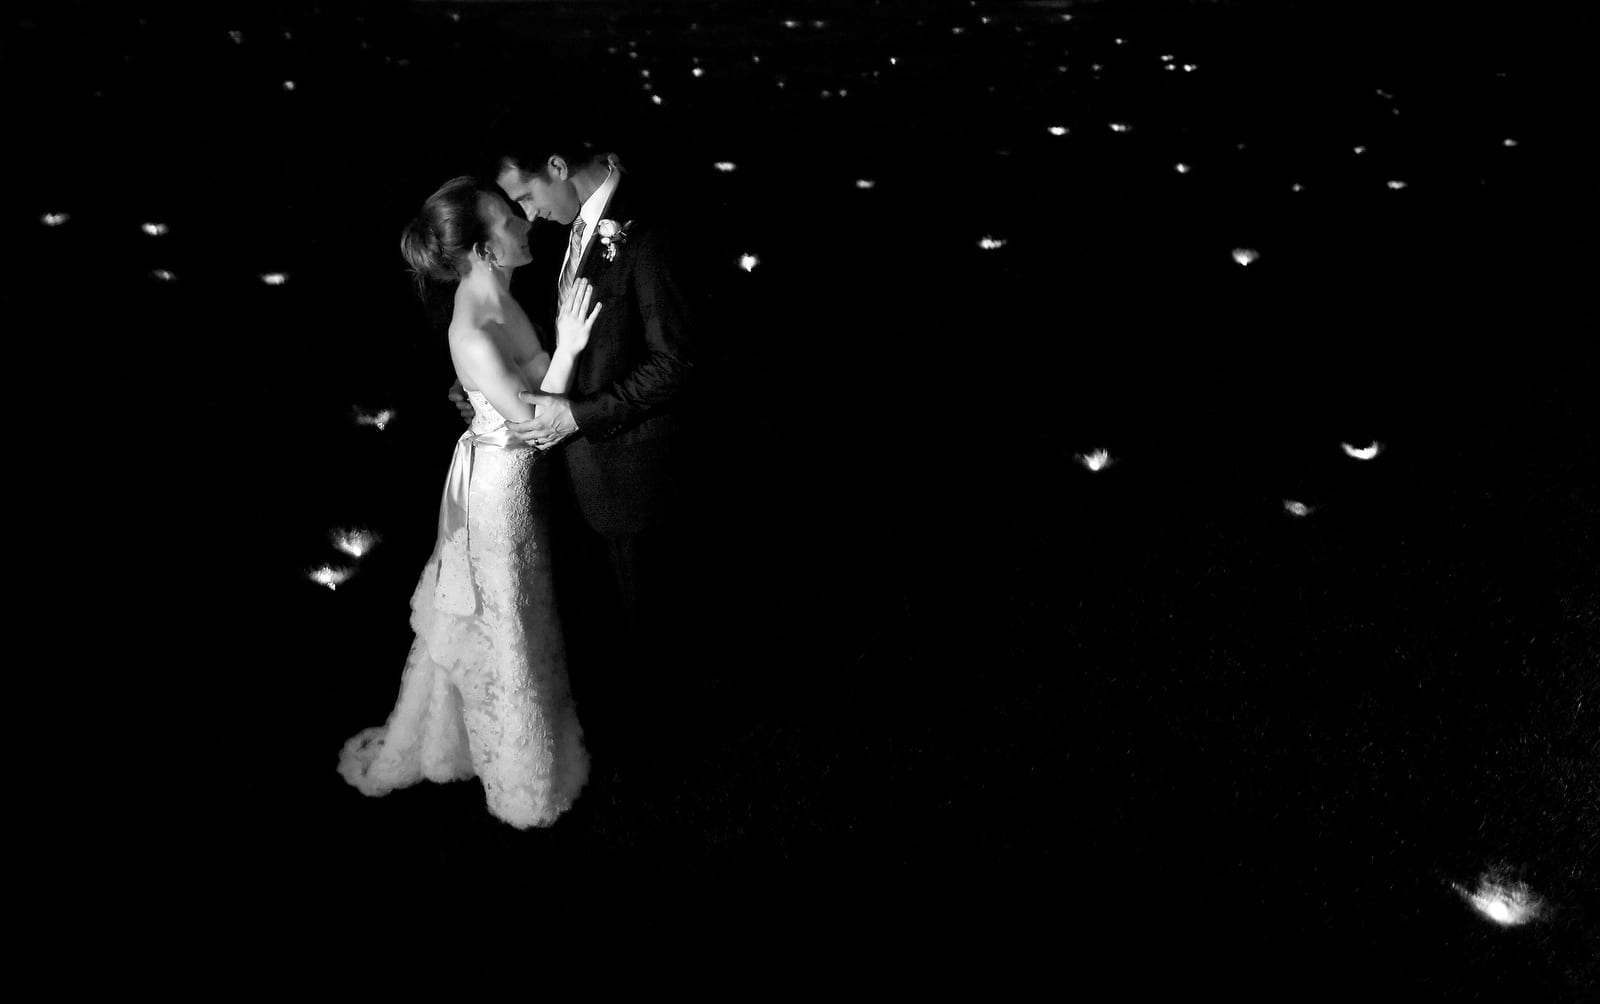 A bride and groom stand face to face in a dark field of lights.